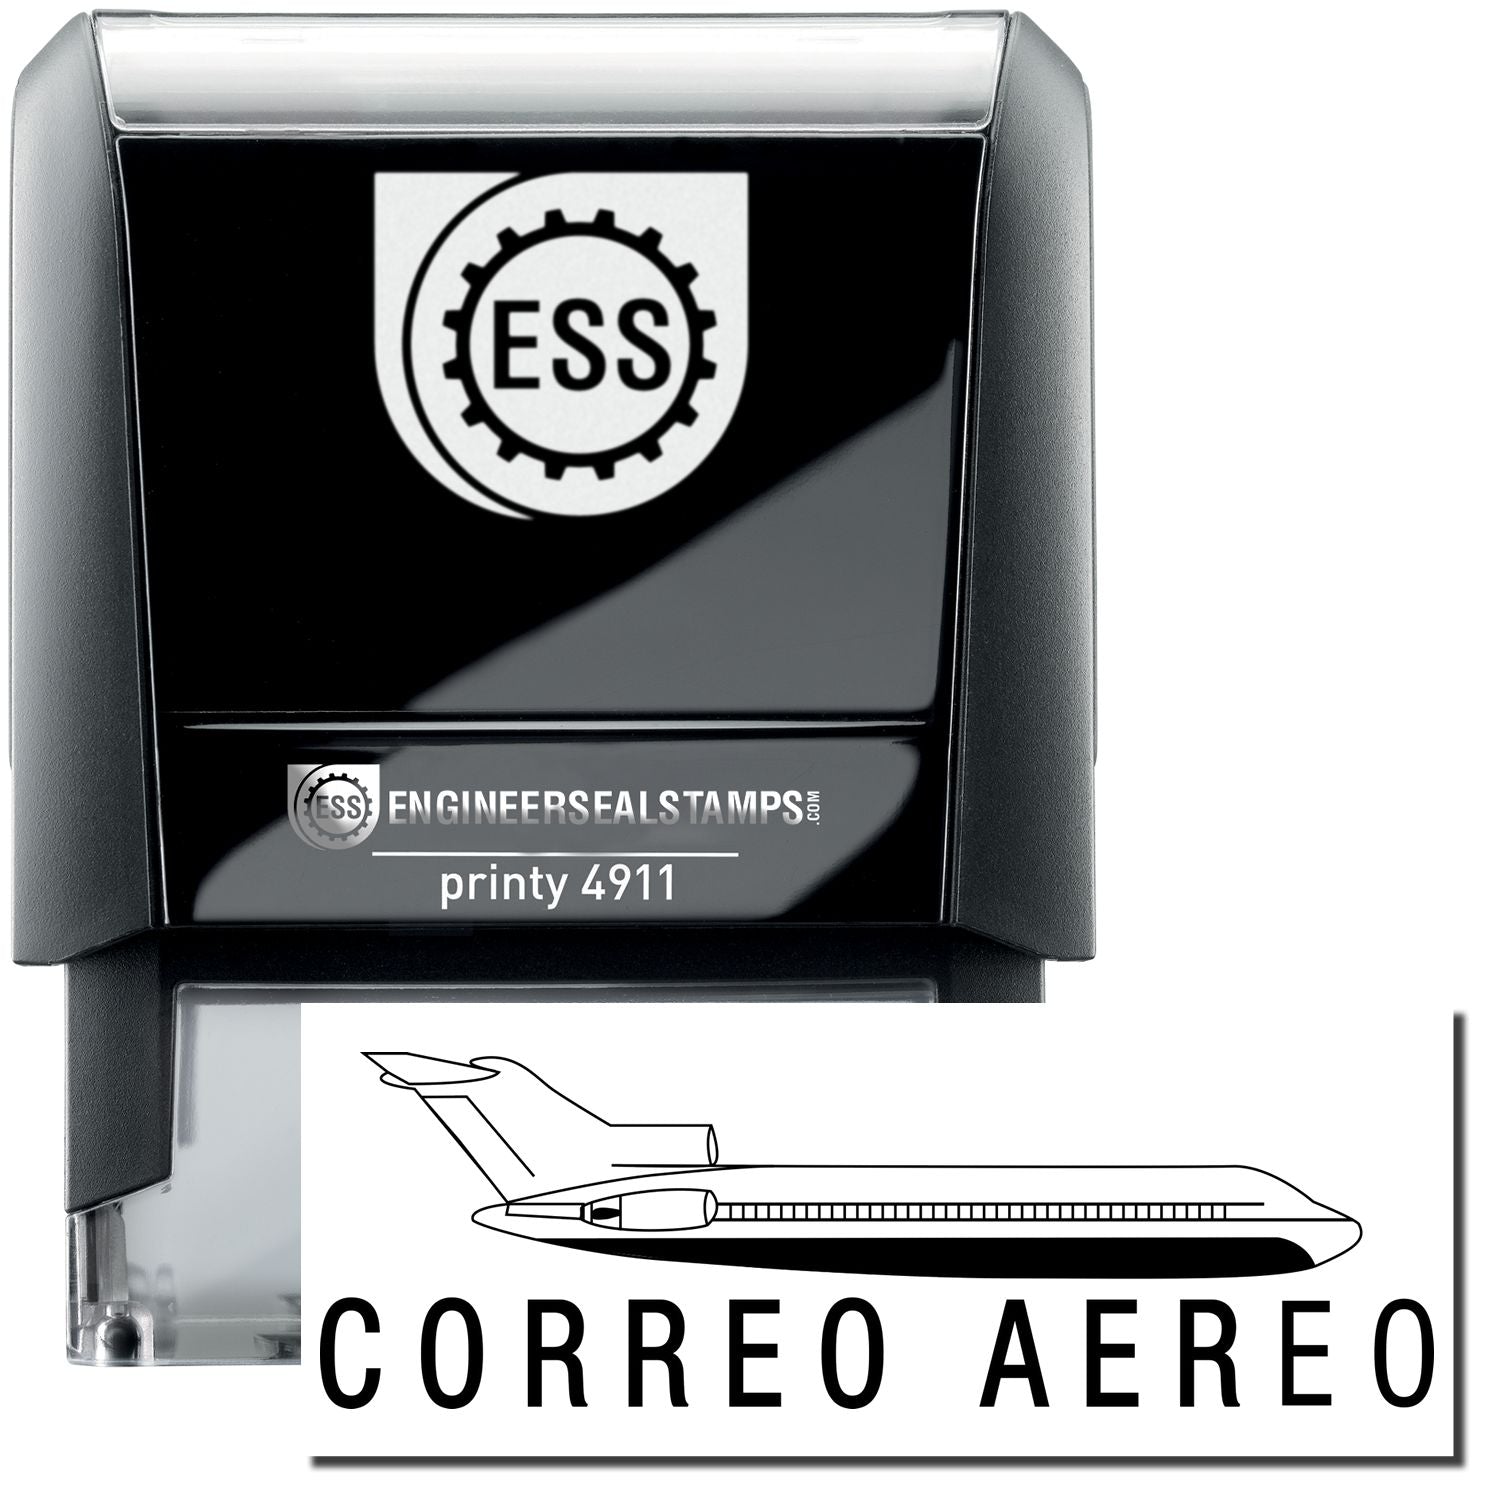 A self-inking stamp with a stamped image showing how the text "CORREO AERO" with an icon of an airplane above the text is displayed after stamping.